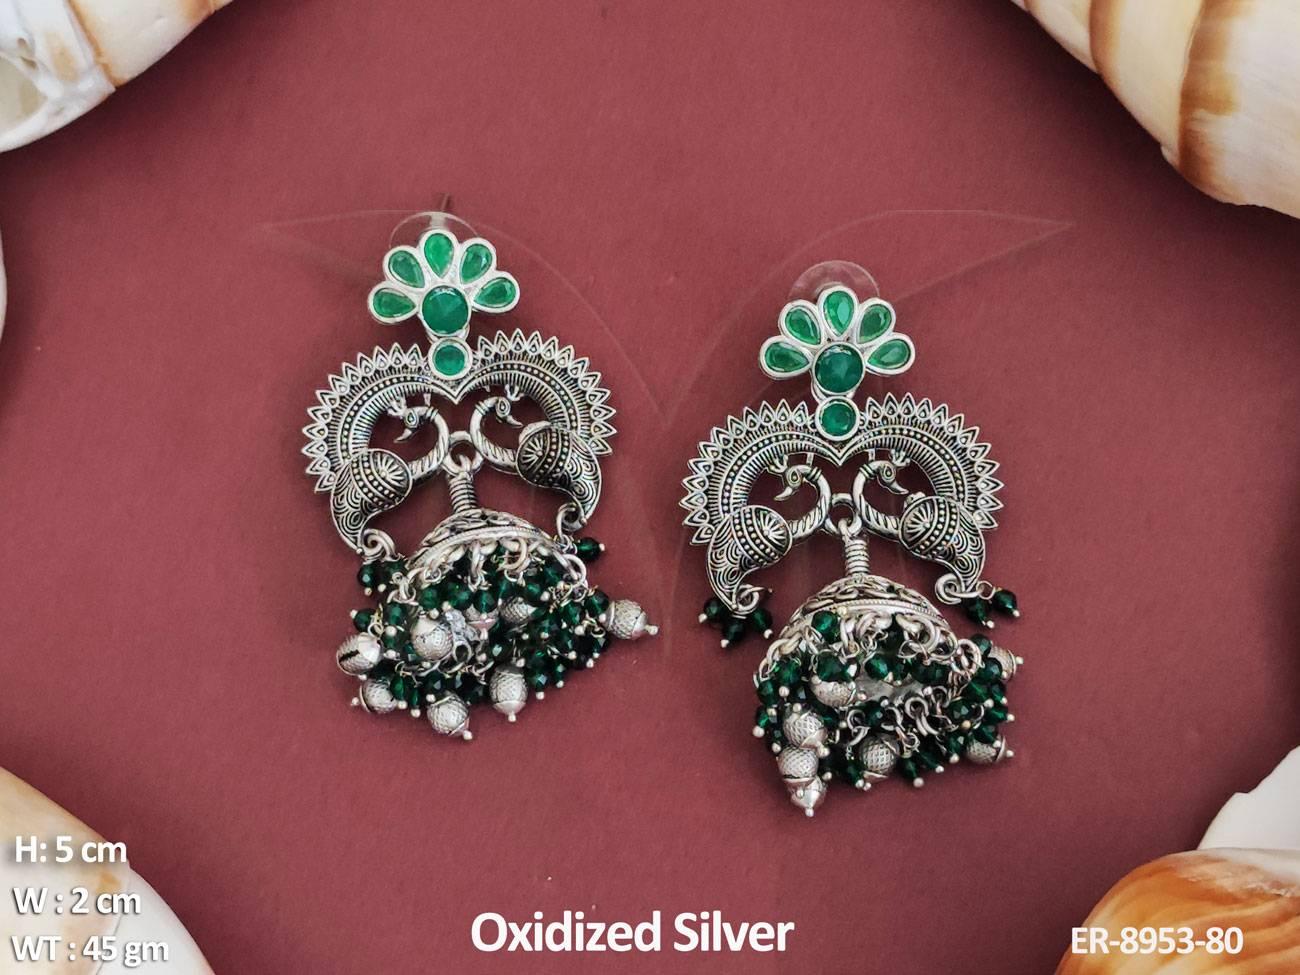 Made with high-quality materials, these earrings are perfect for parties and special occasions.